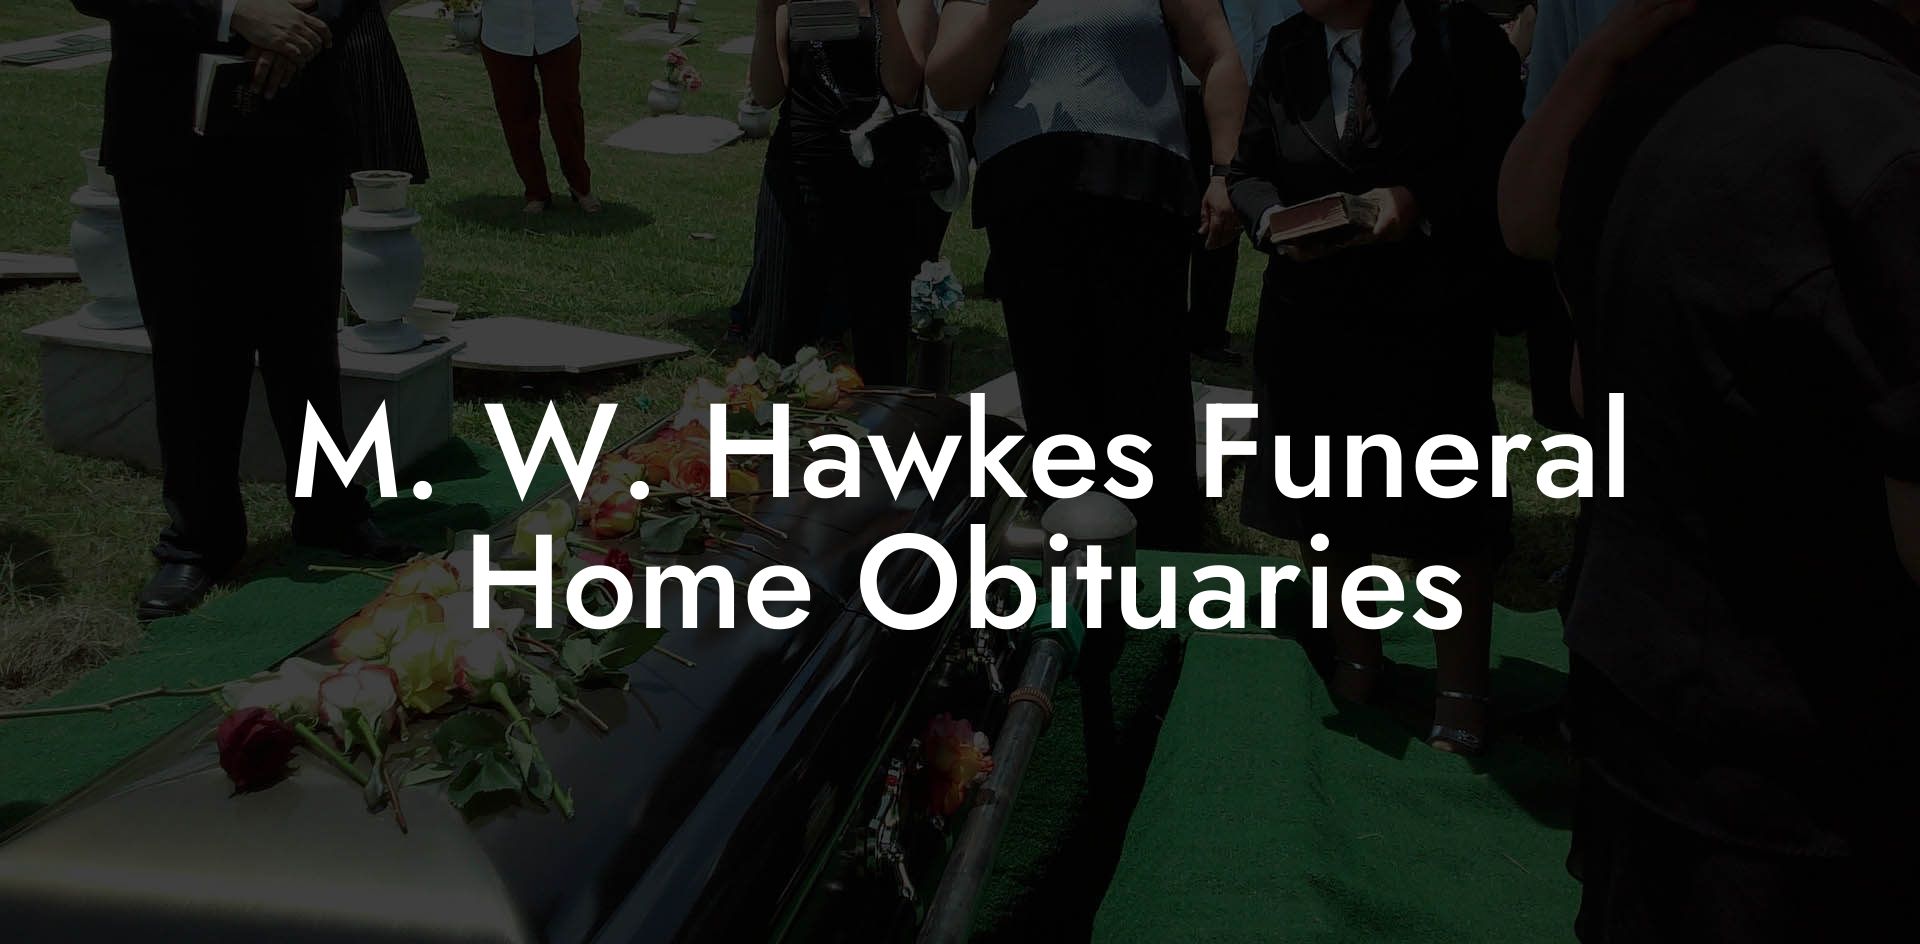 M. W. Hawkes Funeral Home Obituaries